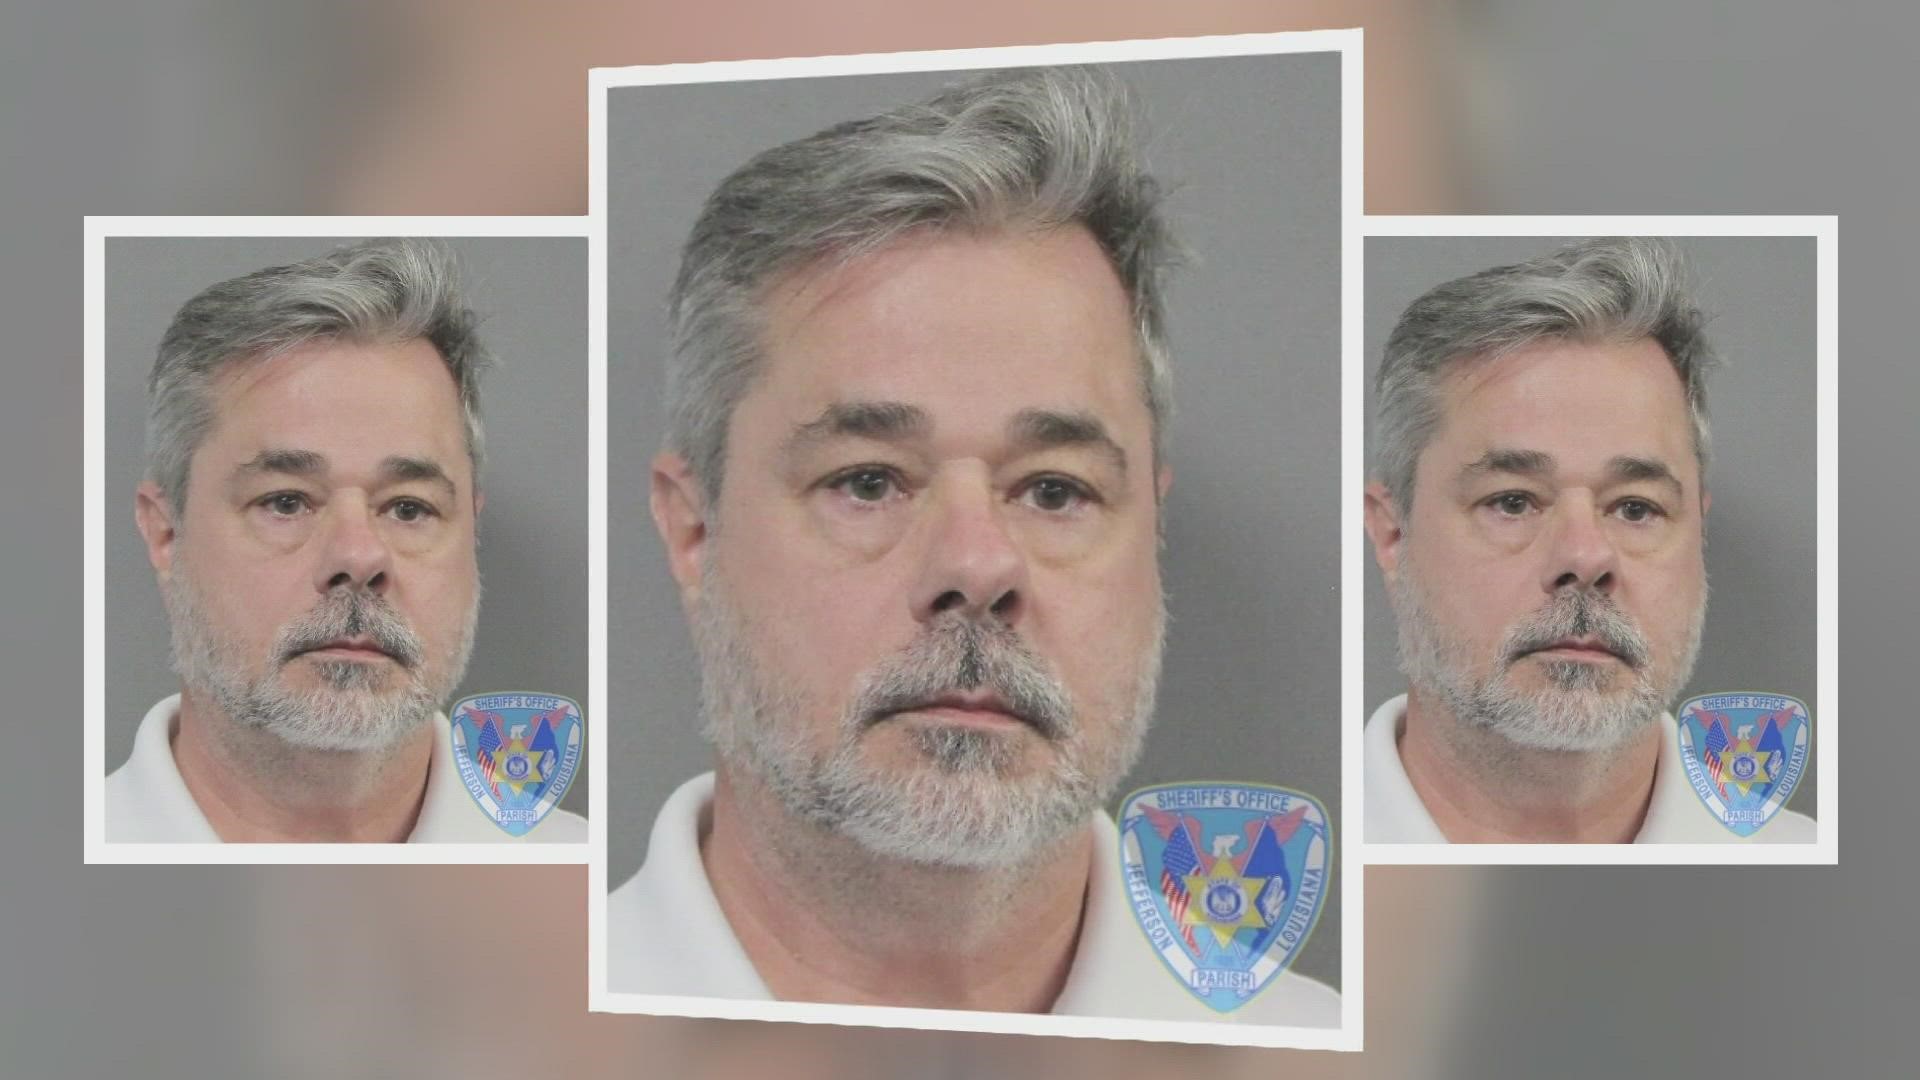 Bail was raised against a former head of a non-profit in New Orleans who is accused of video voyeurism and sexual battery.